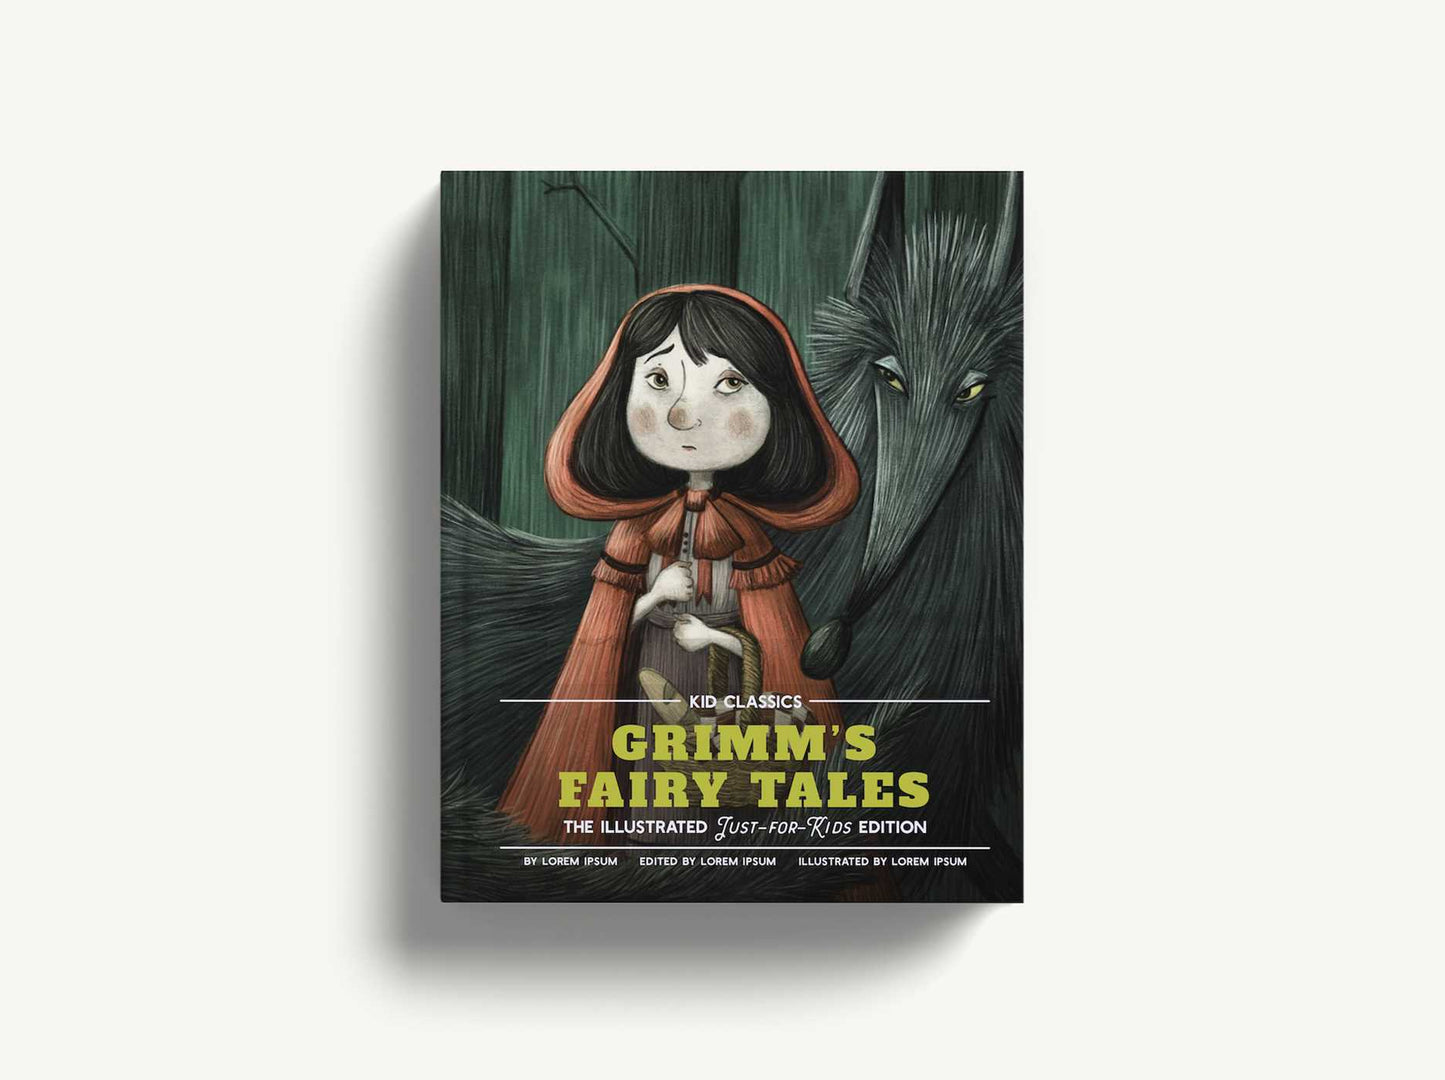 Grimm's Fairy Tales - Kid Classics: The Classic Edition Reimagined Just-for-Kids! (Kid Classic #5)